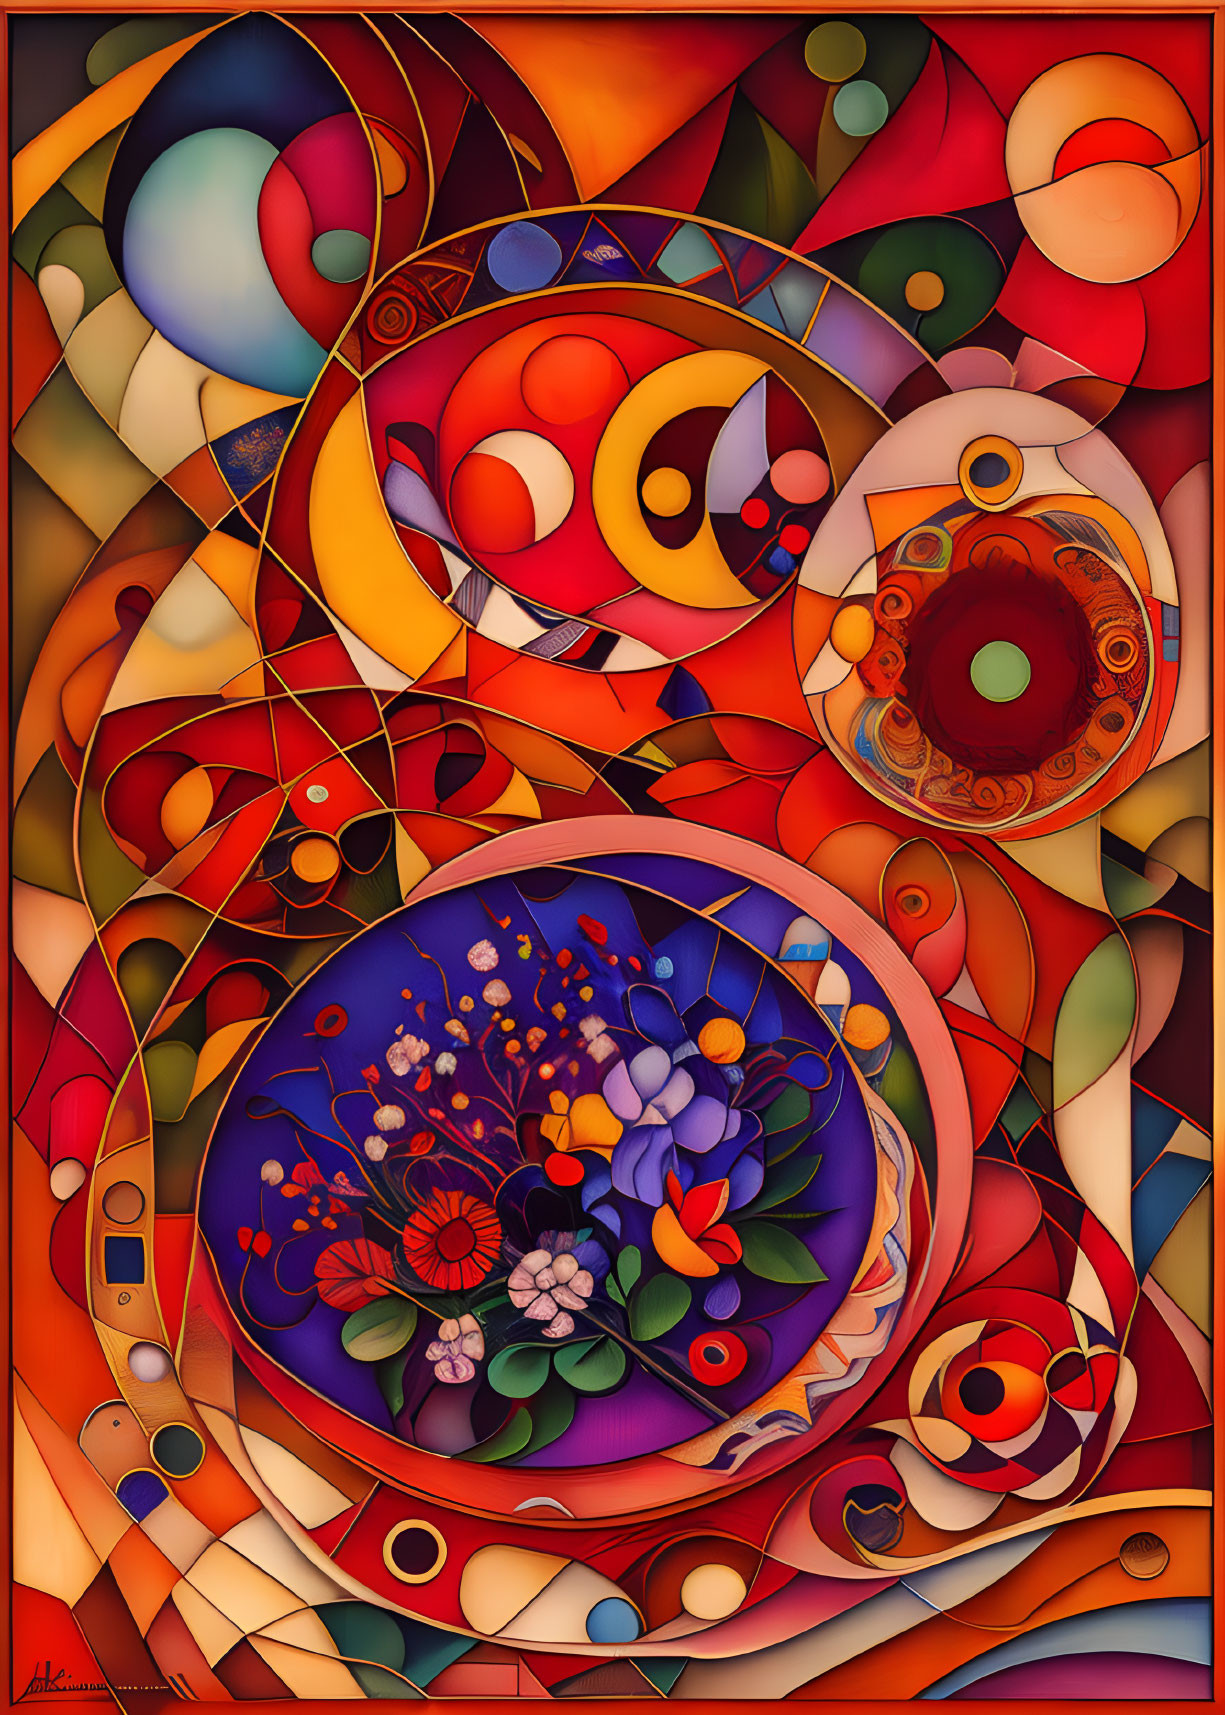 Colorful Abstract Artwork with Geometric and Floral Elements